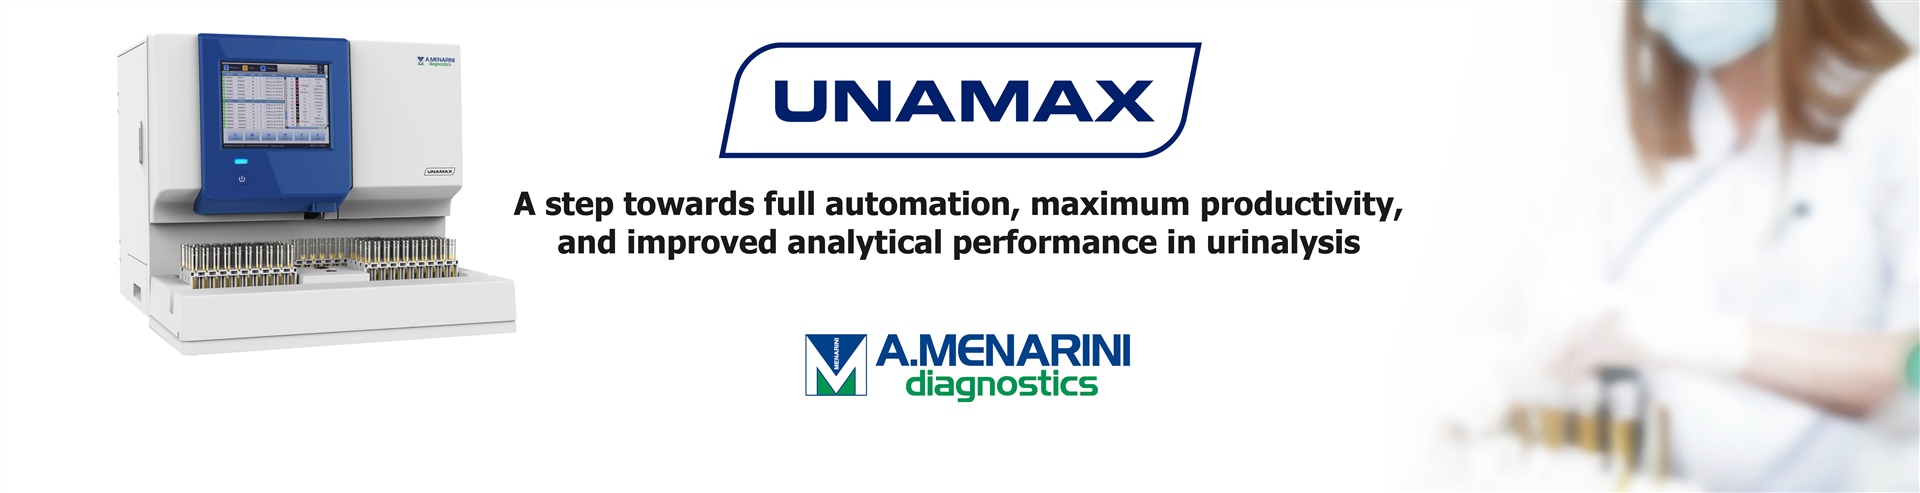 UNAMAX now available